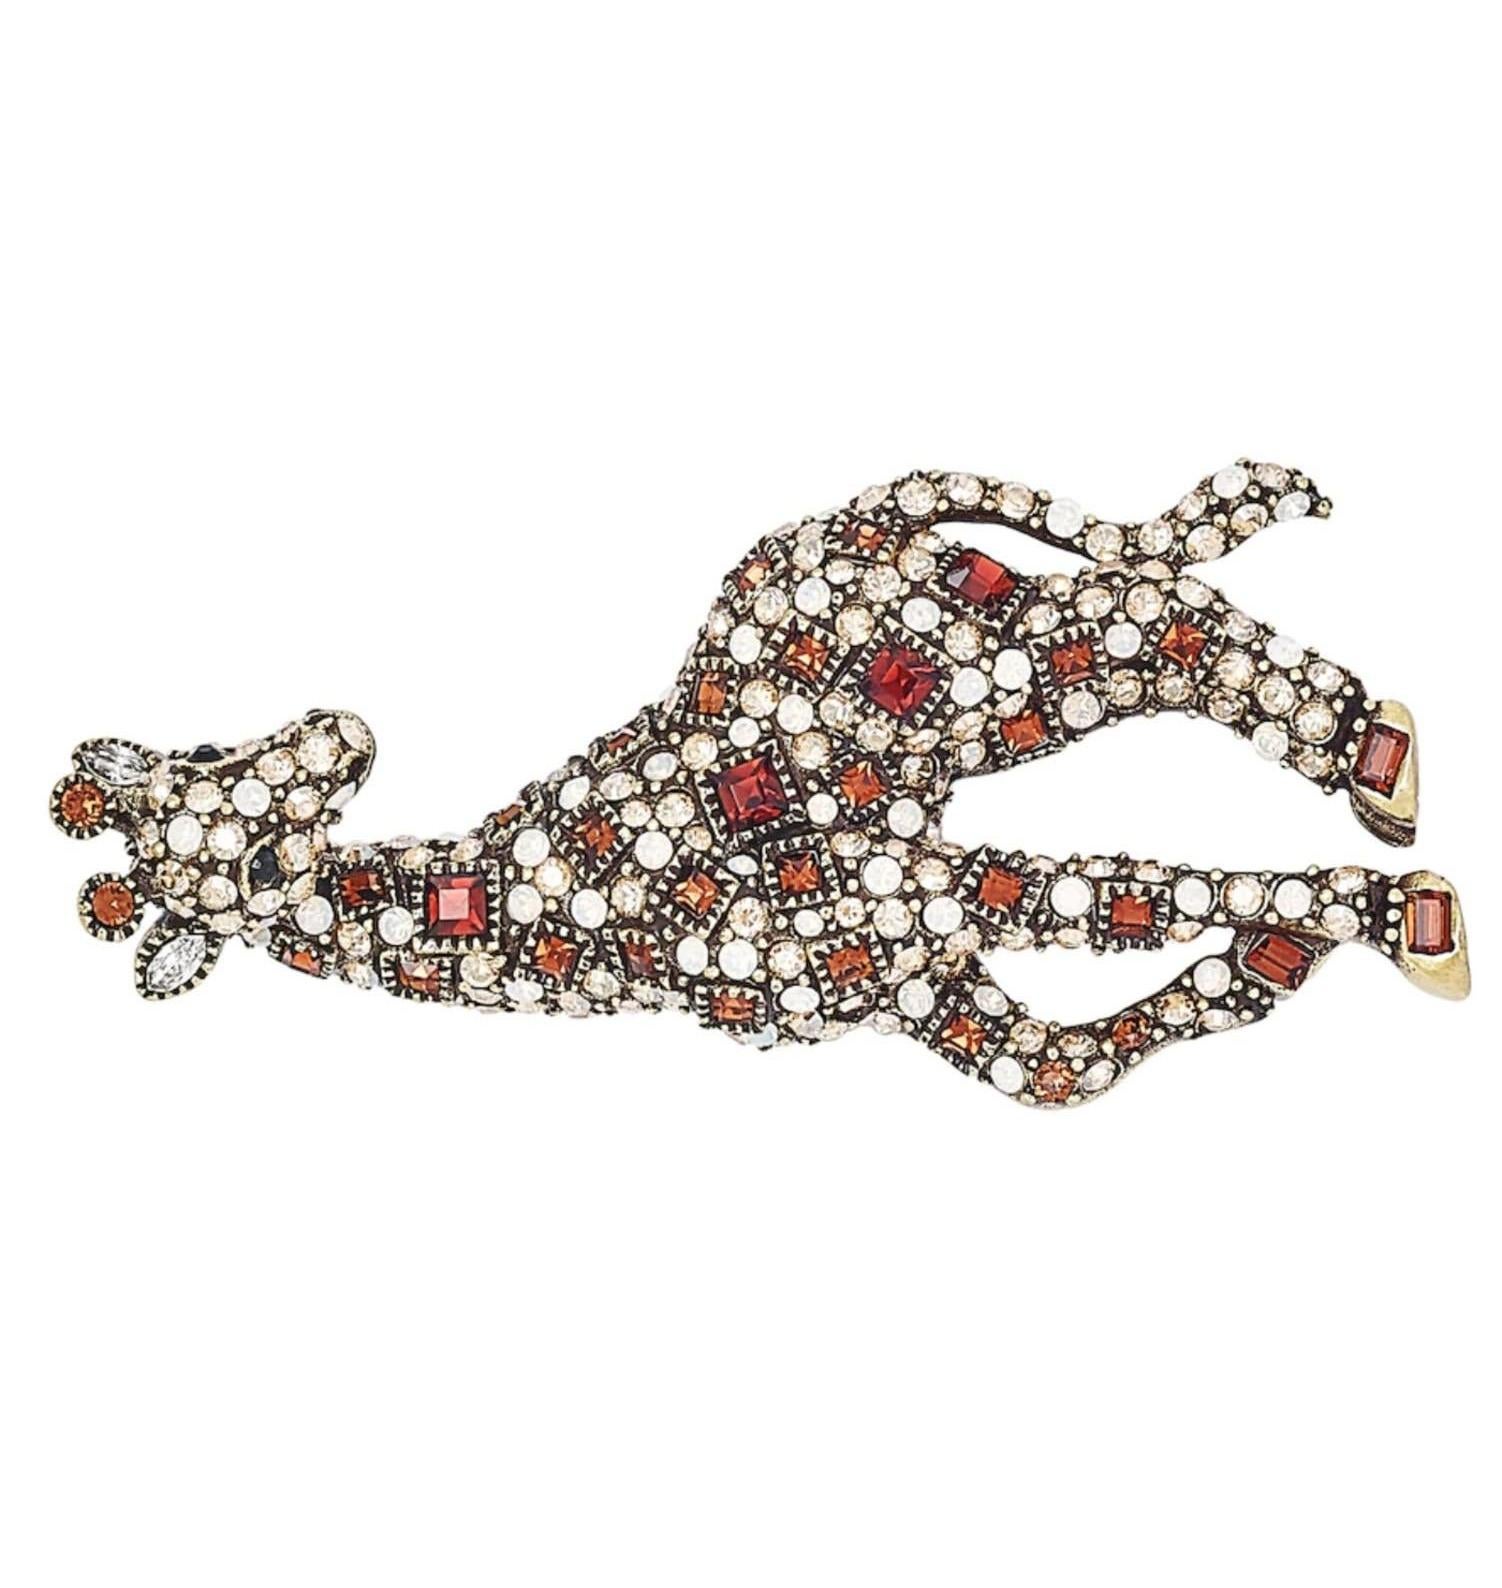 Let this sassy and stylish Georgette Giraffe Crystal Critter Pin by Heidi Daus saunter into your jewelry wardrobe.

• Brass with bronze tone plating
• Various amounts, shapes and sizes of cognac clear and opaque AB crystals, faceted

• Pin